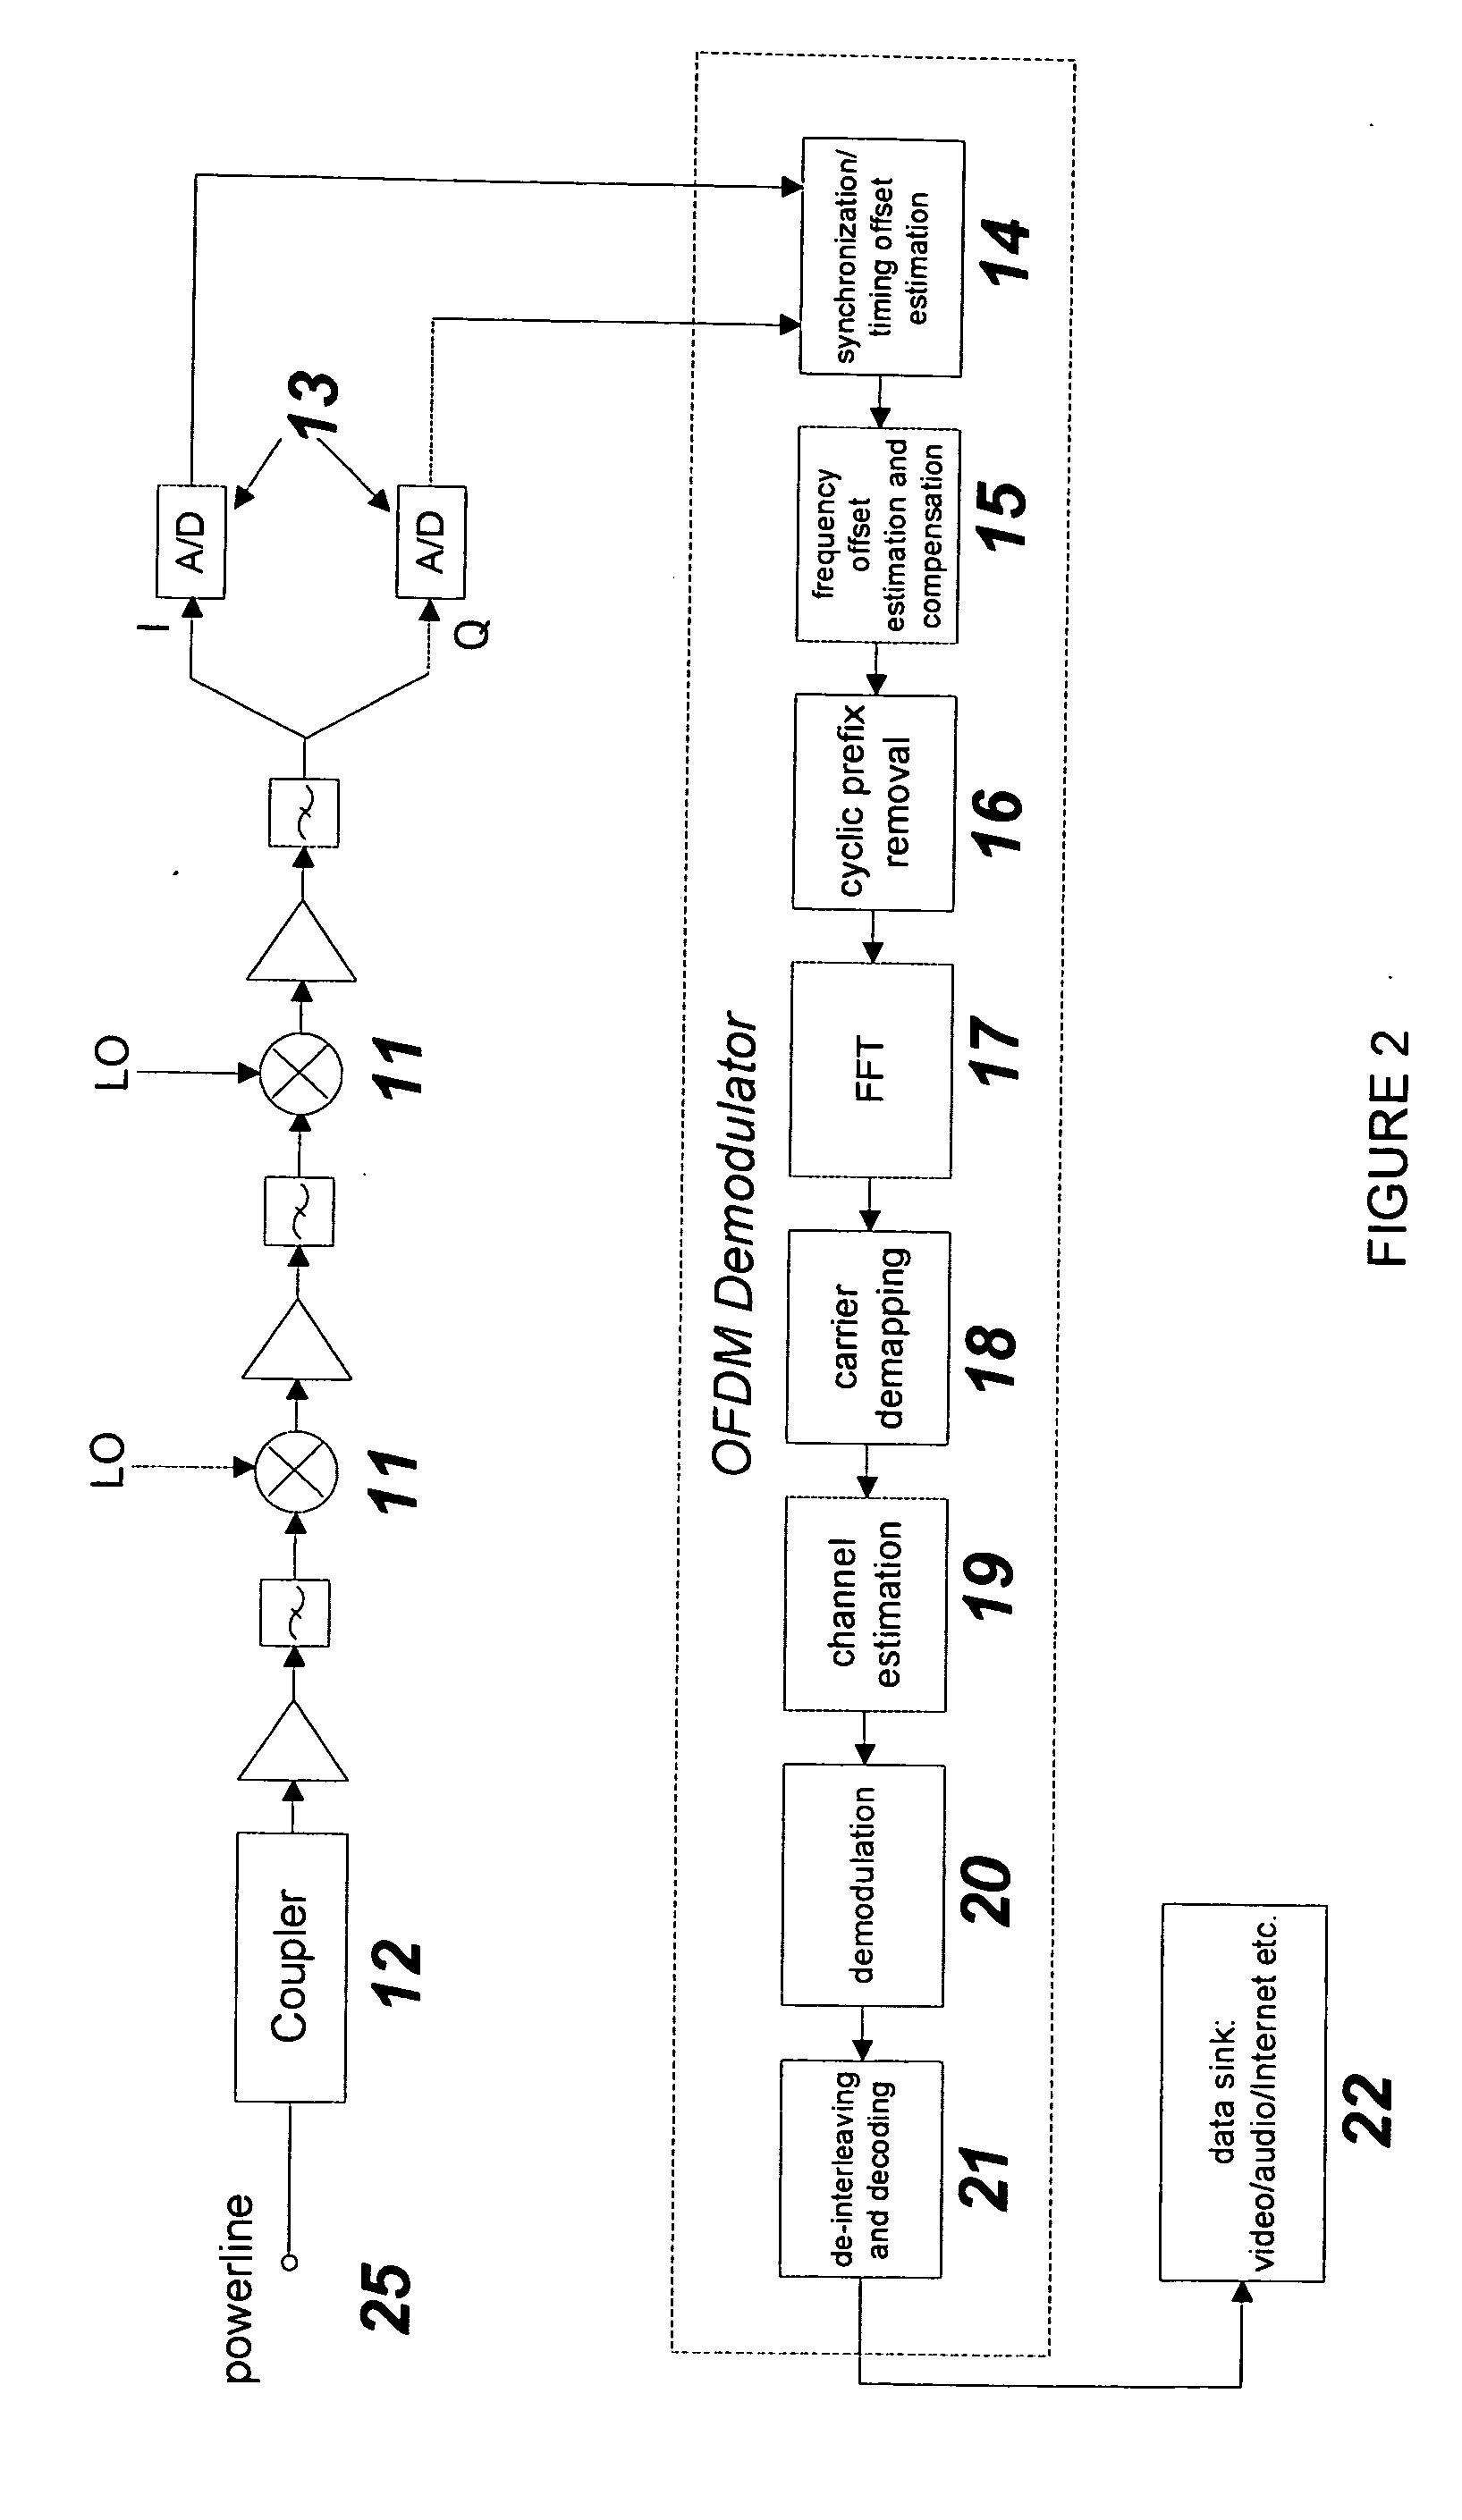 Frequency modulated OFDM over various communication media